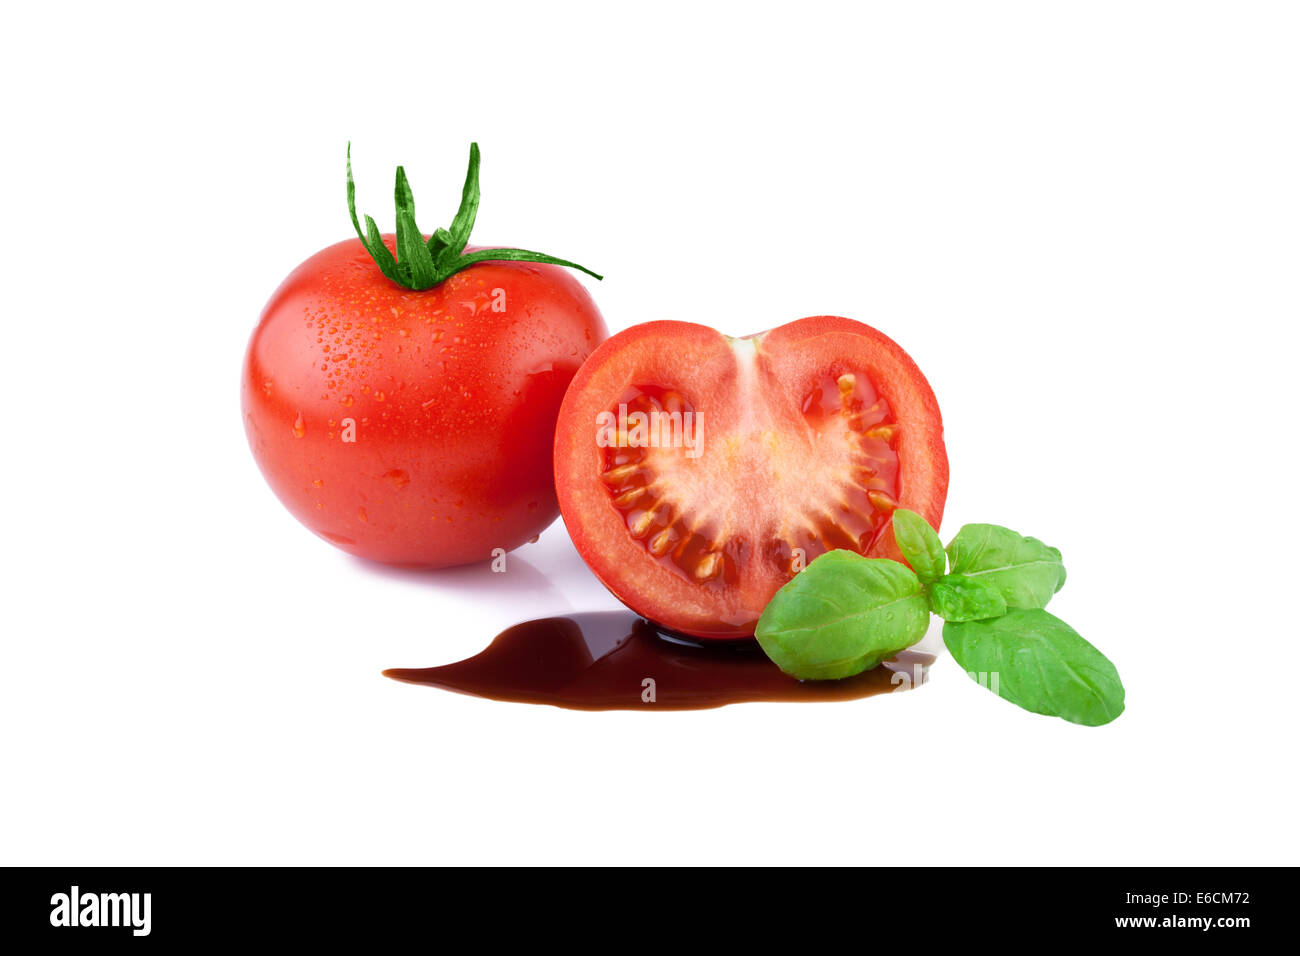 Tomato with Basil and Balsamic Vinegar Stock Photo